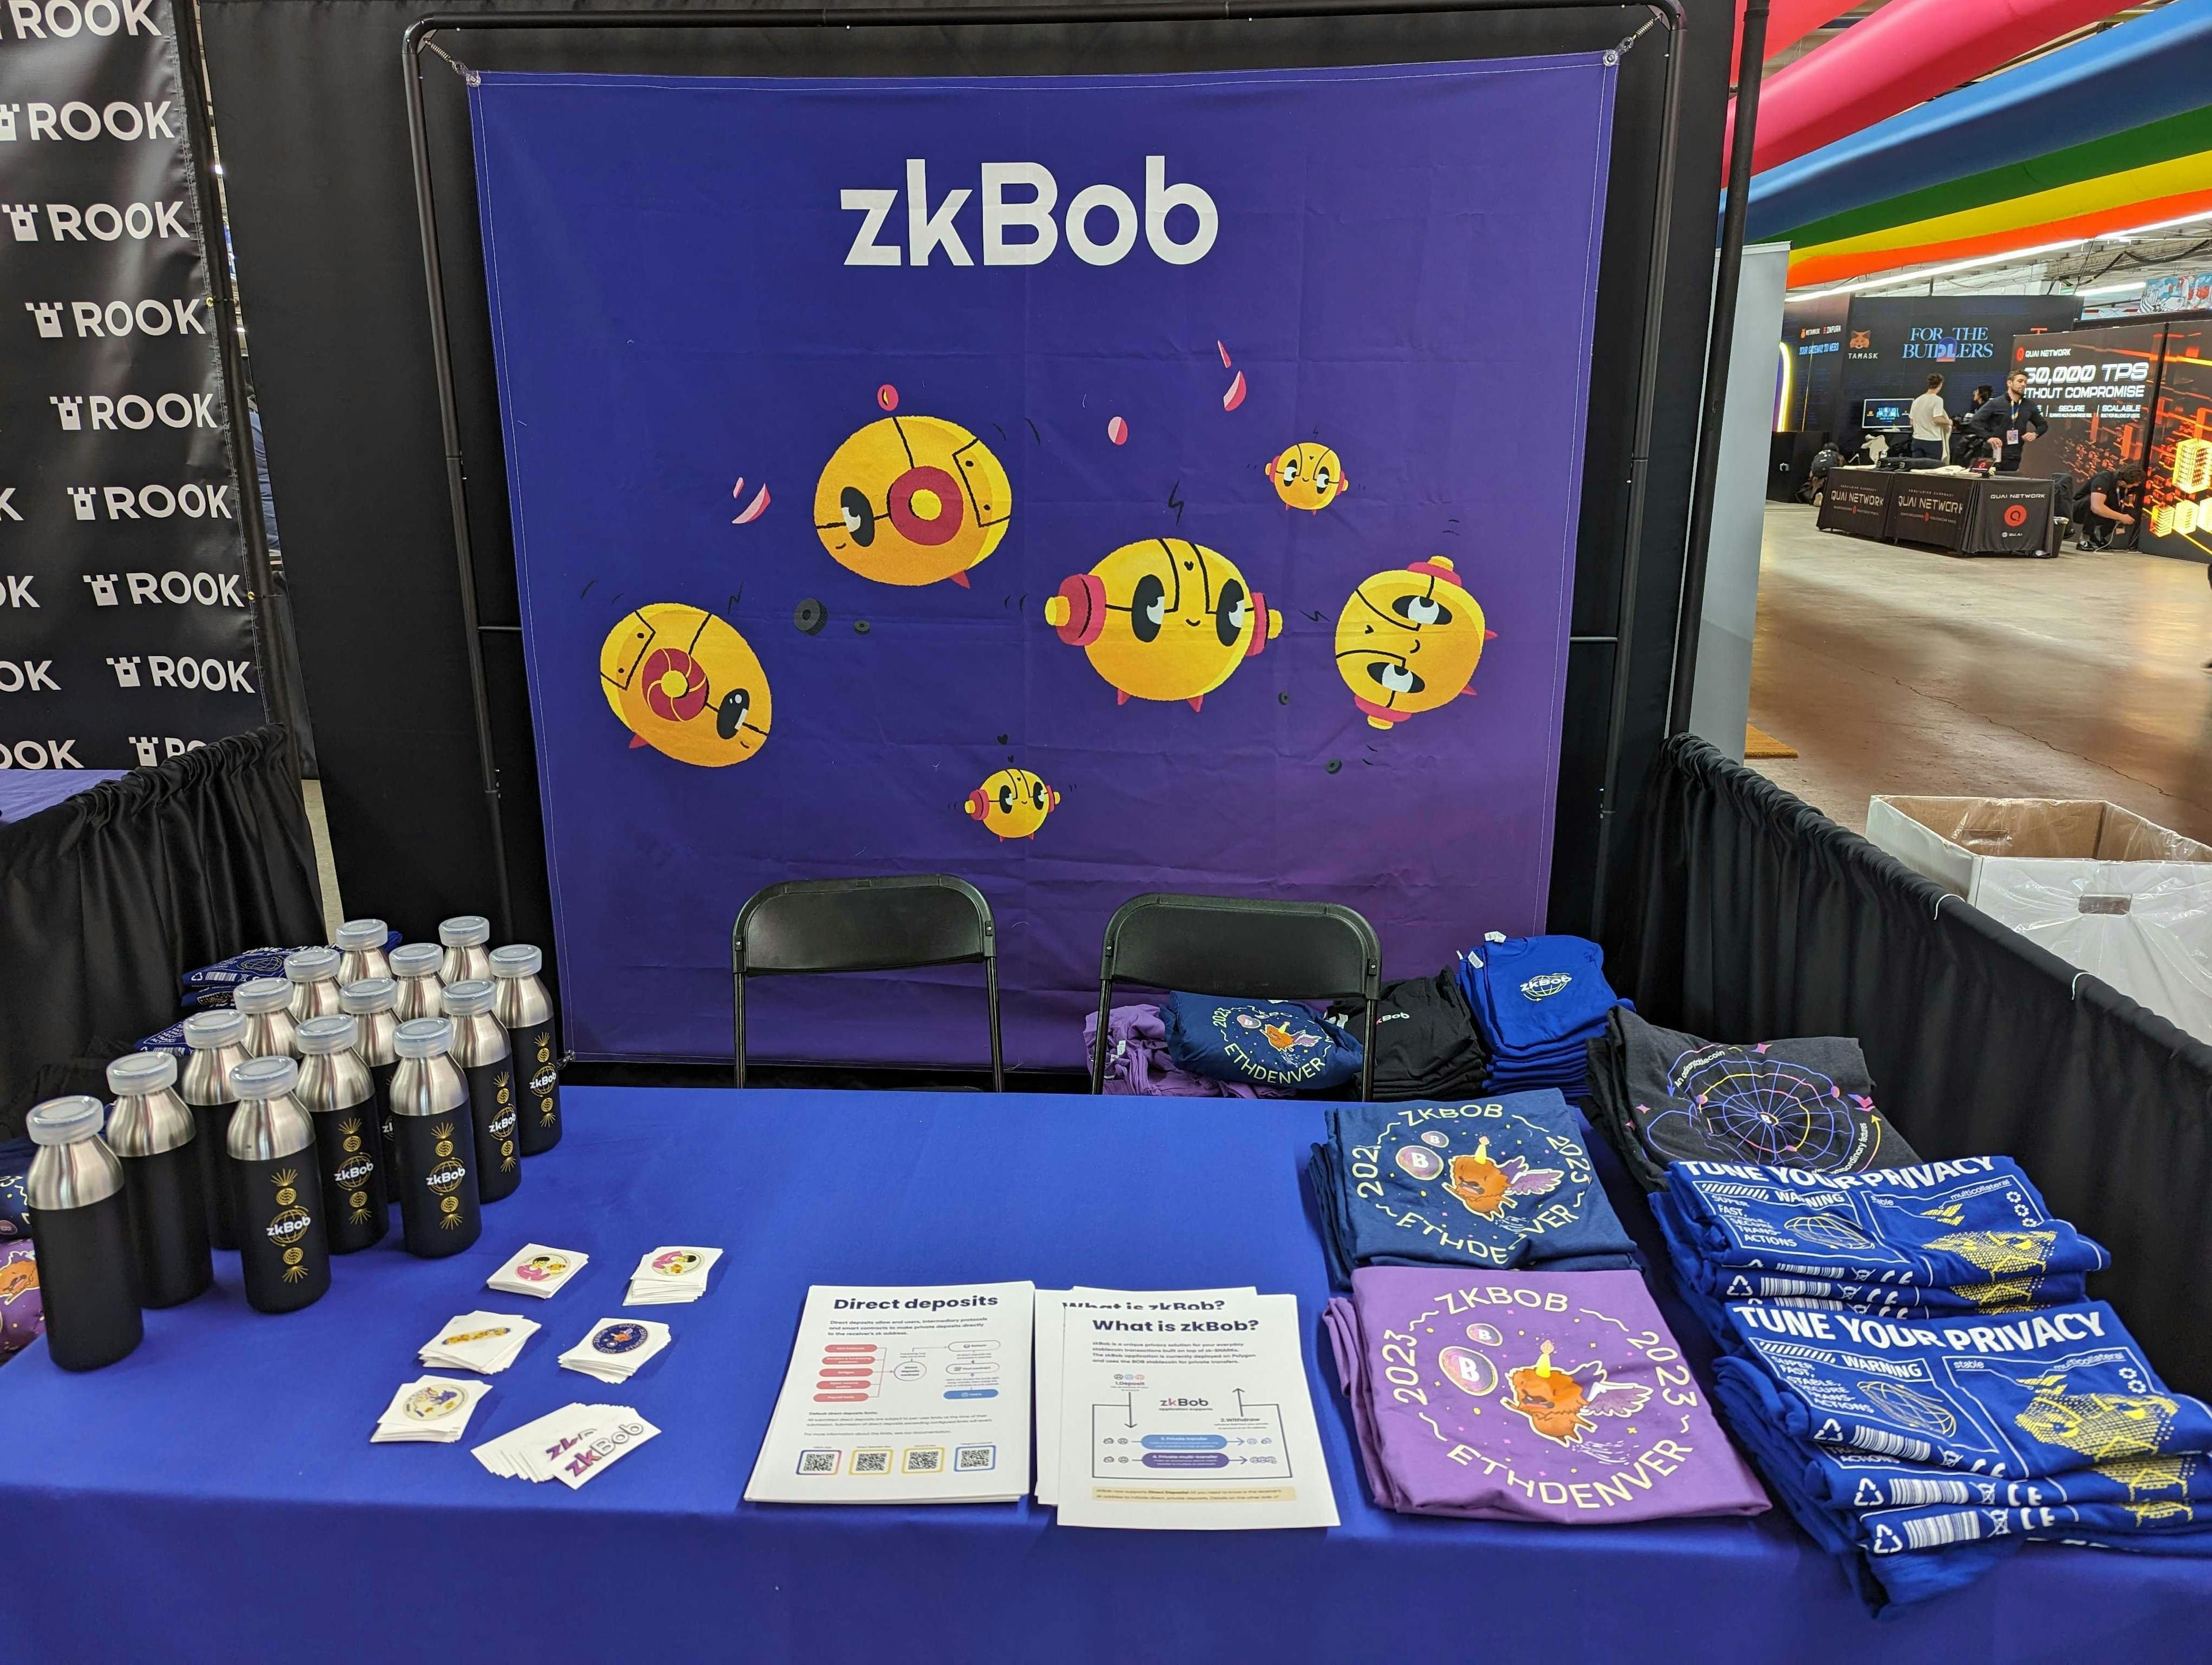 Bottles, shirts, stickers, socks....zkBob swag was popular with conference goers.